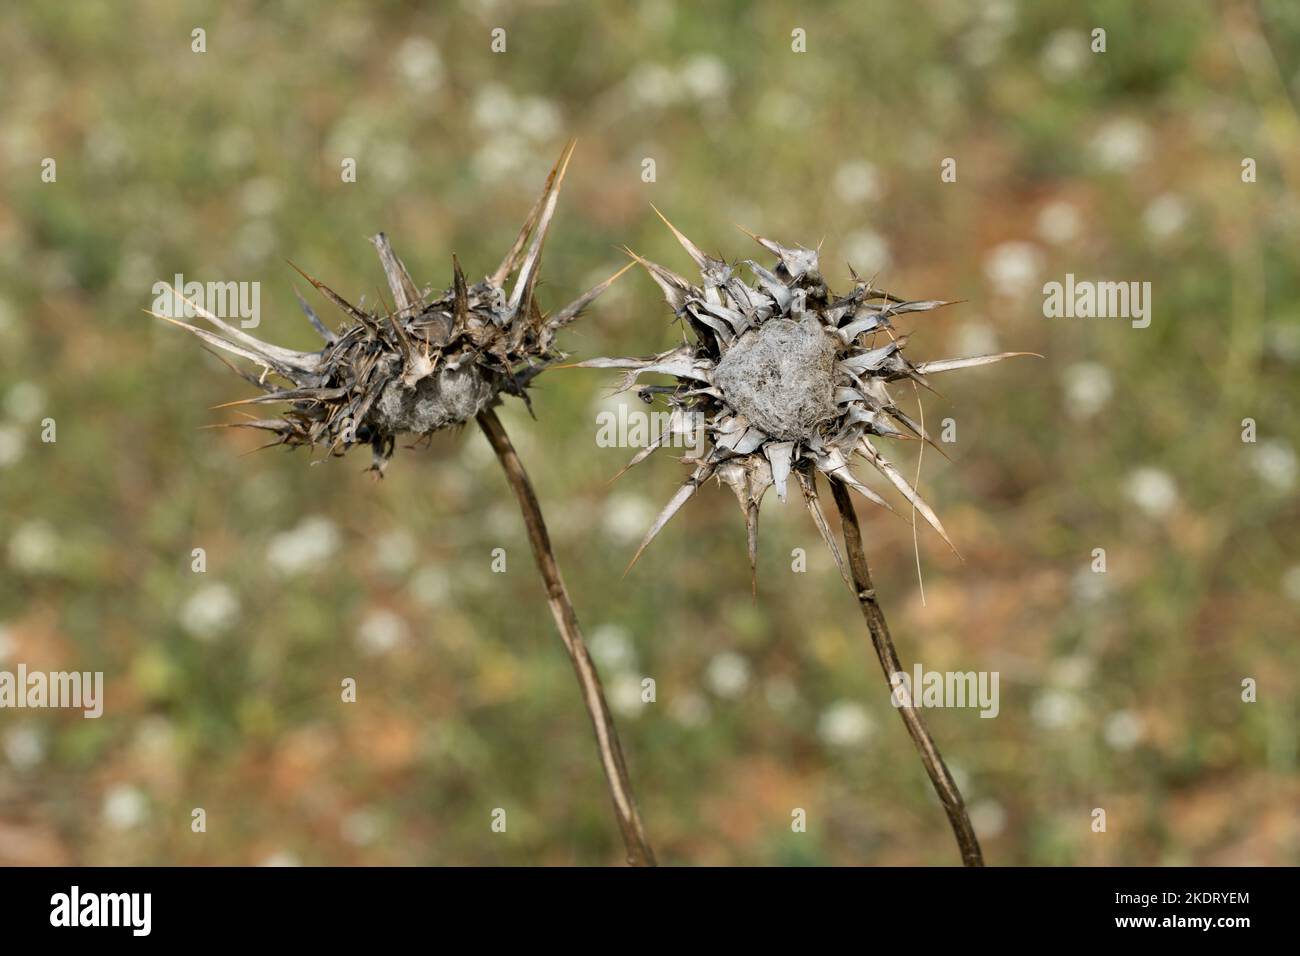 Two dry flowers of Borriquero Thistle or Onopordum acanthium, a wild plant with healing properties Stock Photo